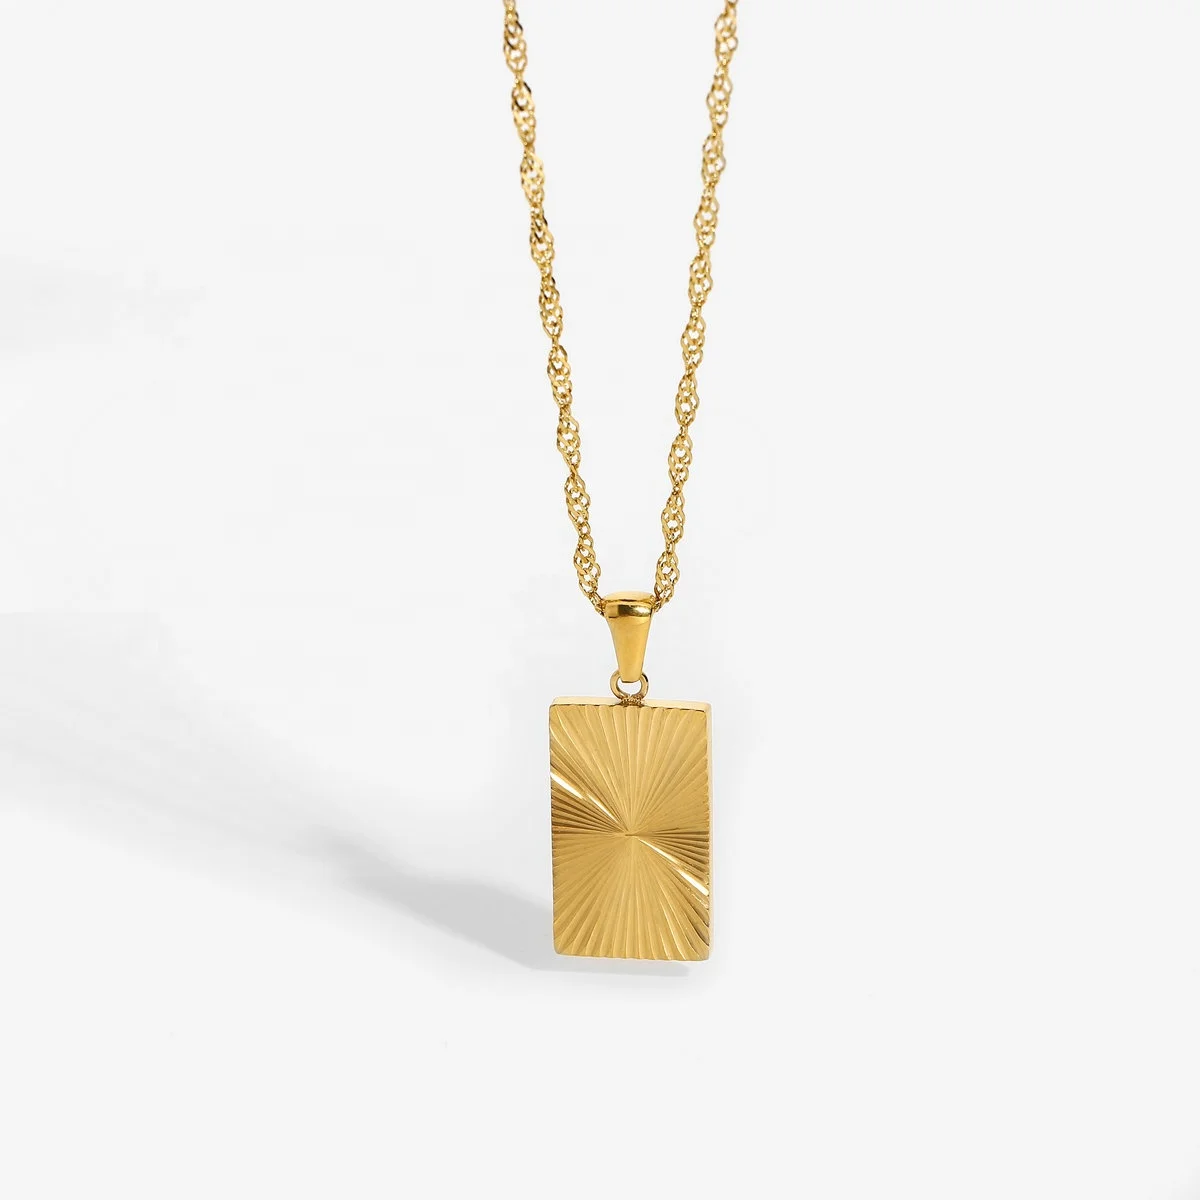 

2021 New Trend Divergent Sunlight Coin Necklace 18K gold plated stainless steel Rectangular Pendant Necklace